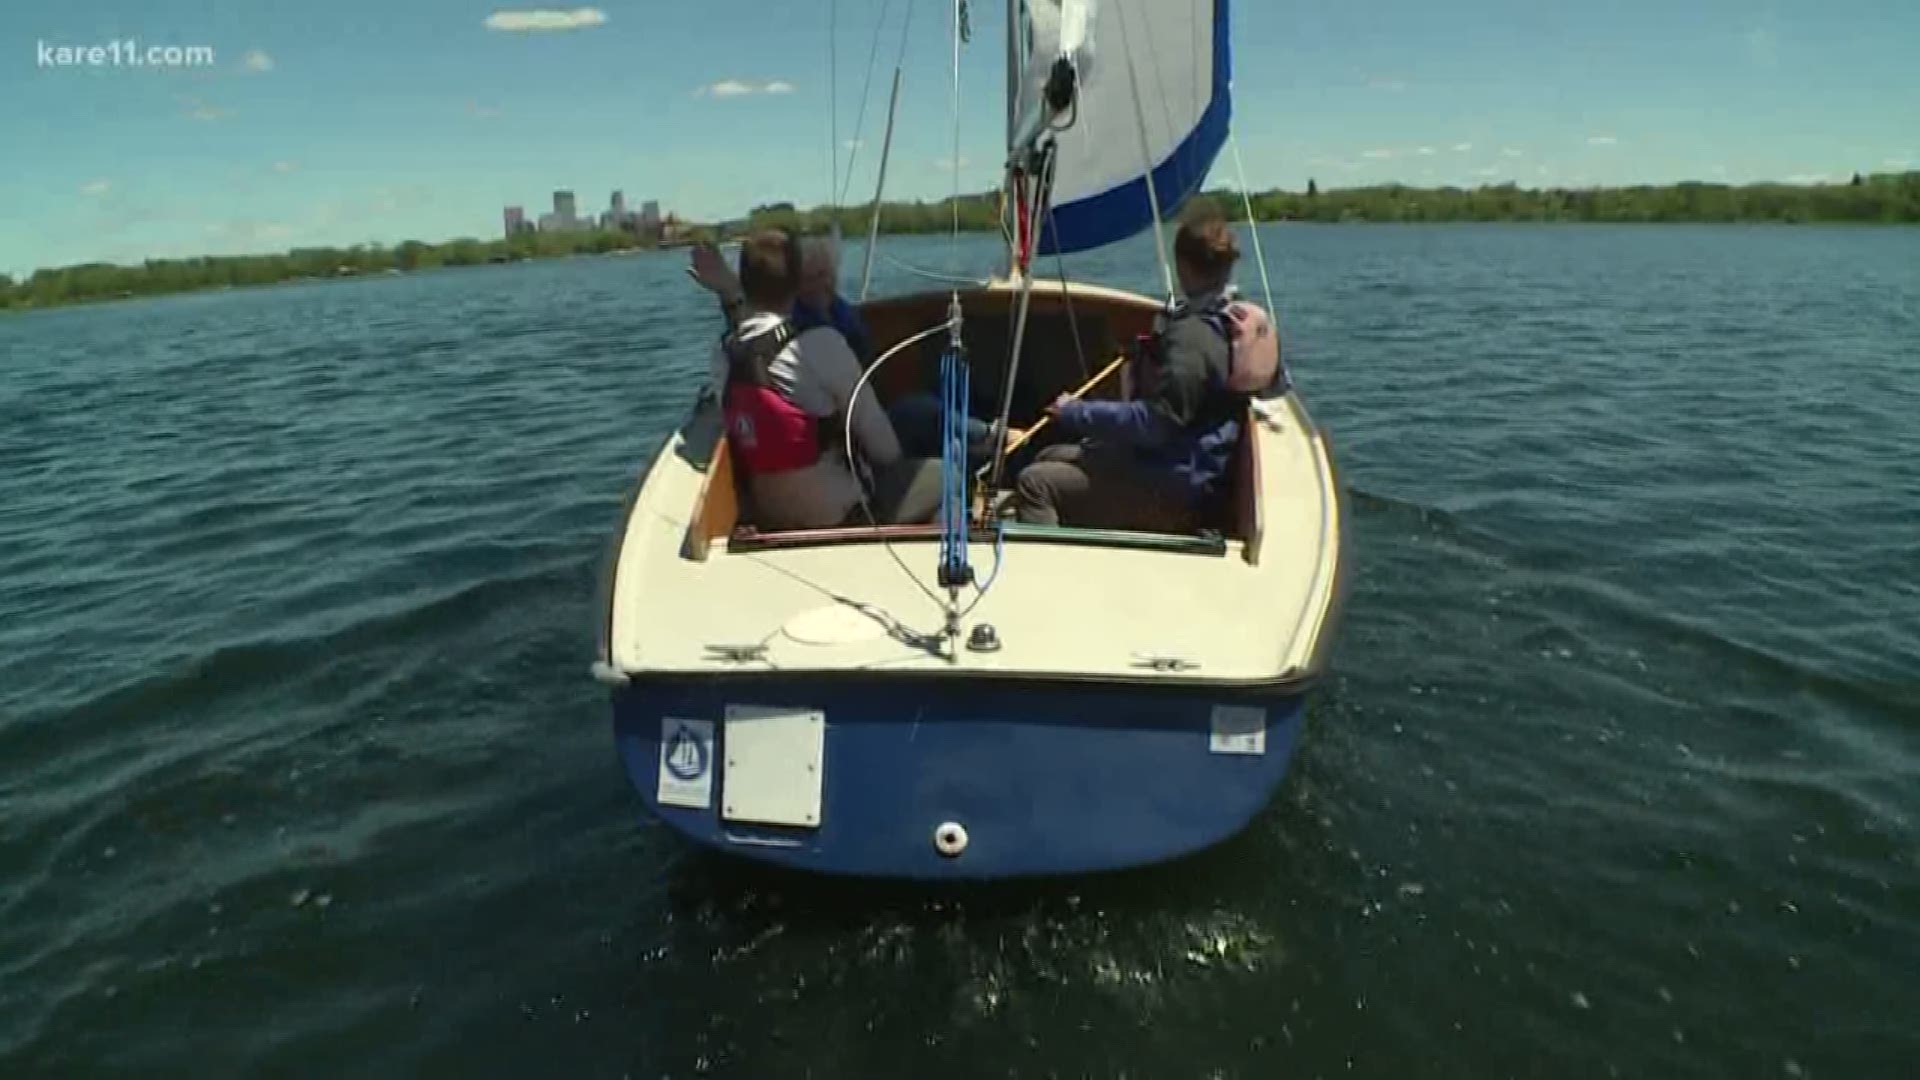 Founded in 1989, the mission of Minneapolis Sailing Center is to foster an inclusive, sustainable community and to teach sailing to all.